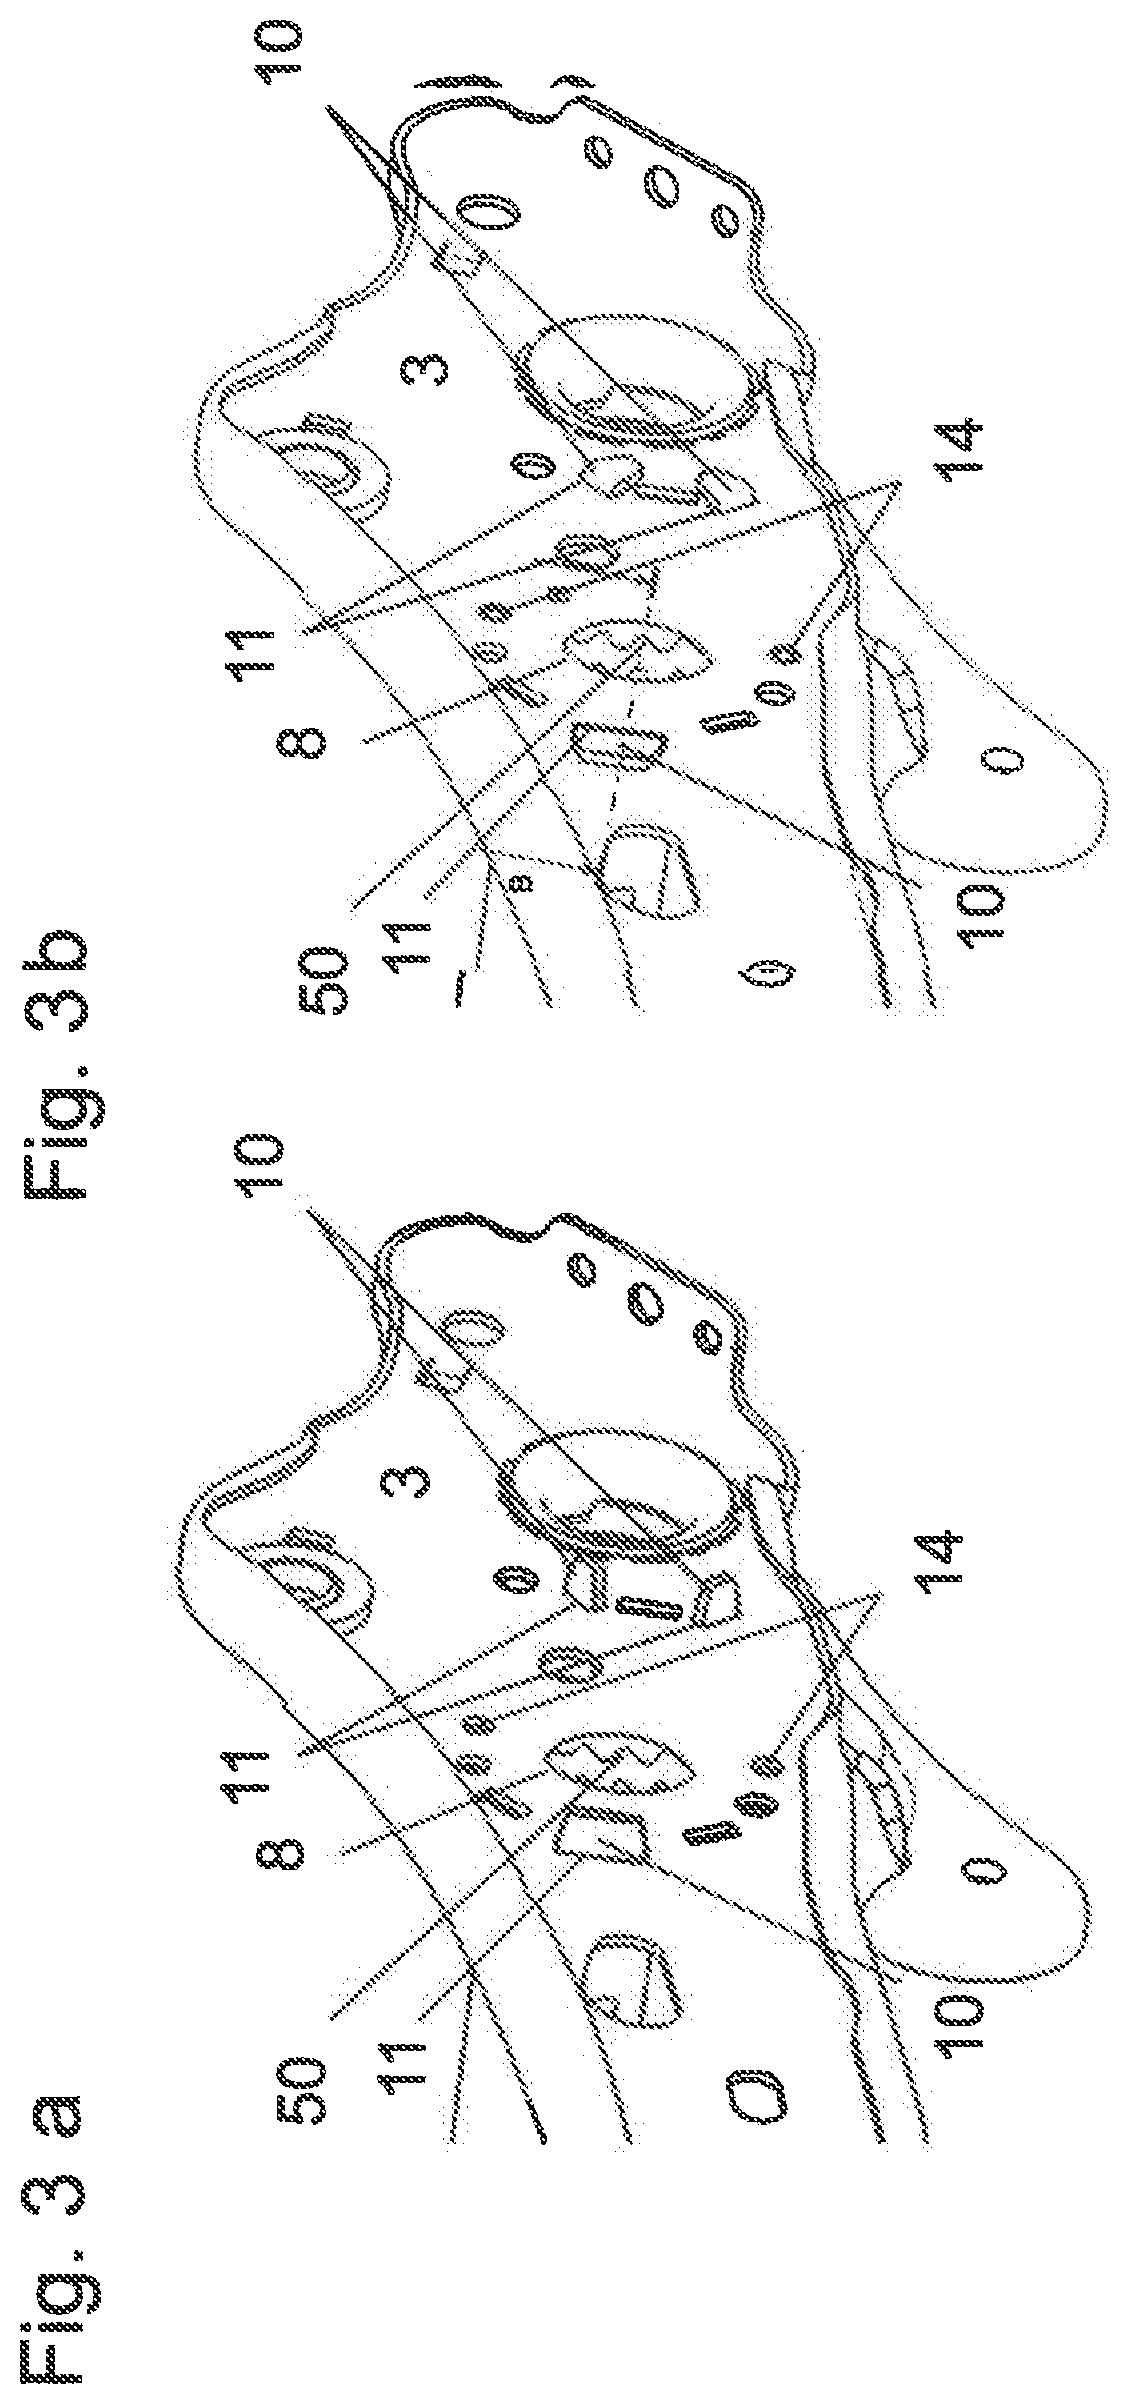 Method for assembling a transmission component for a seat height adjustment